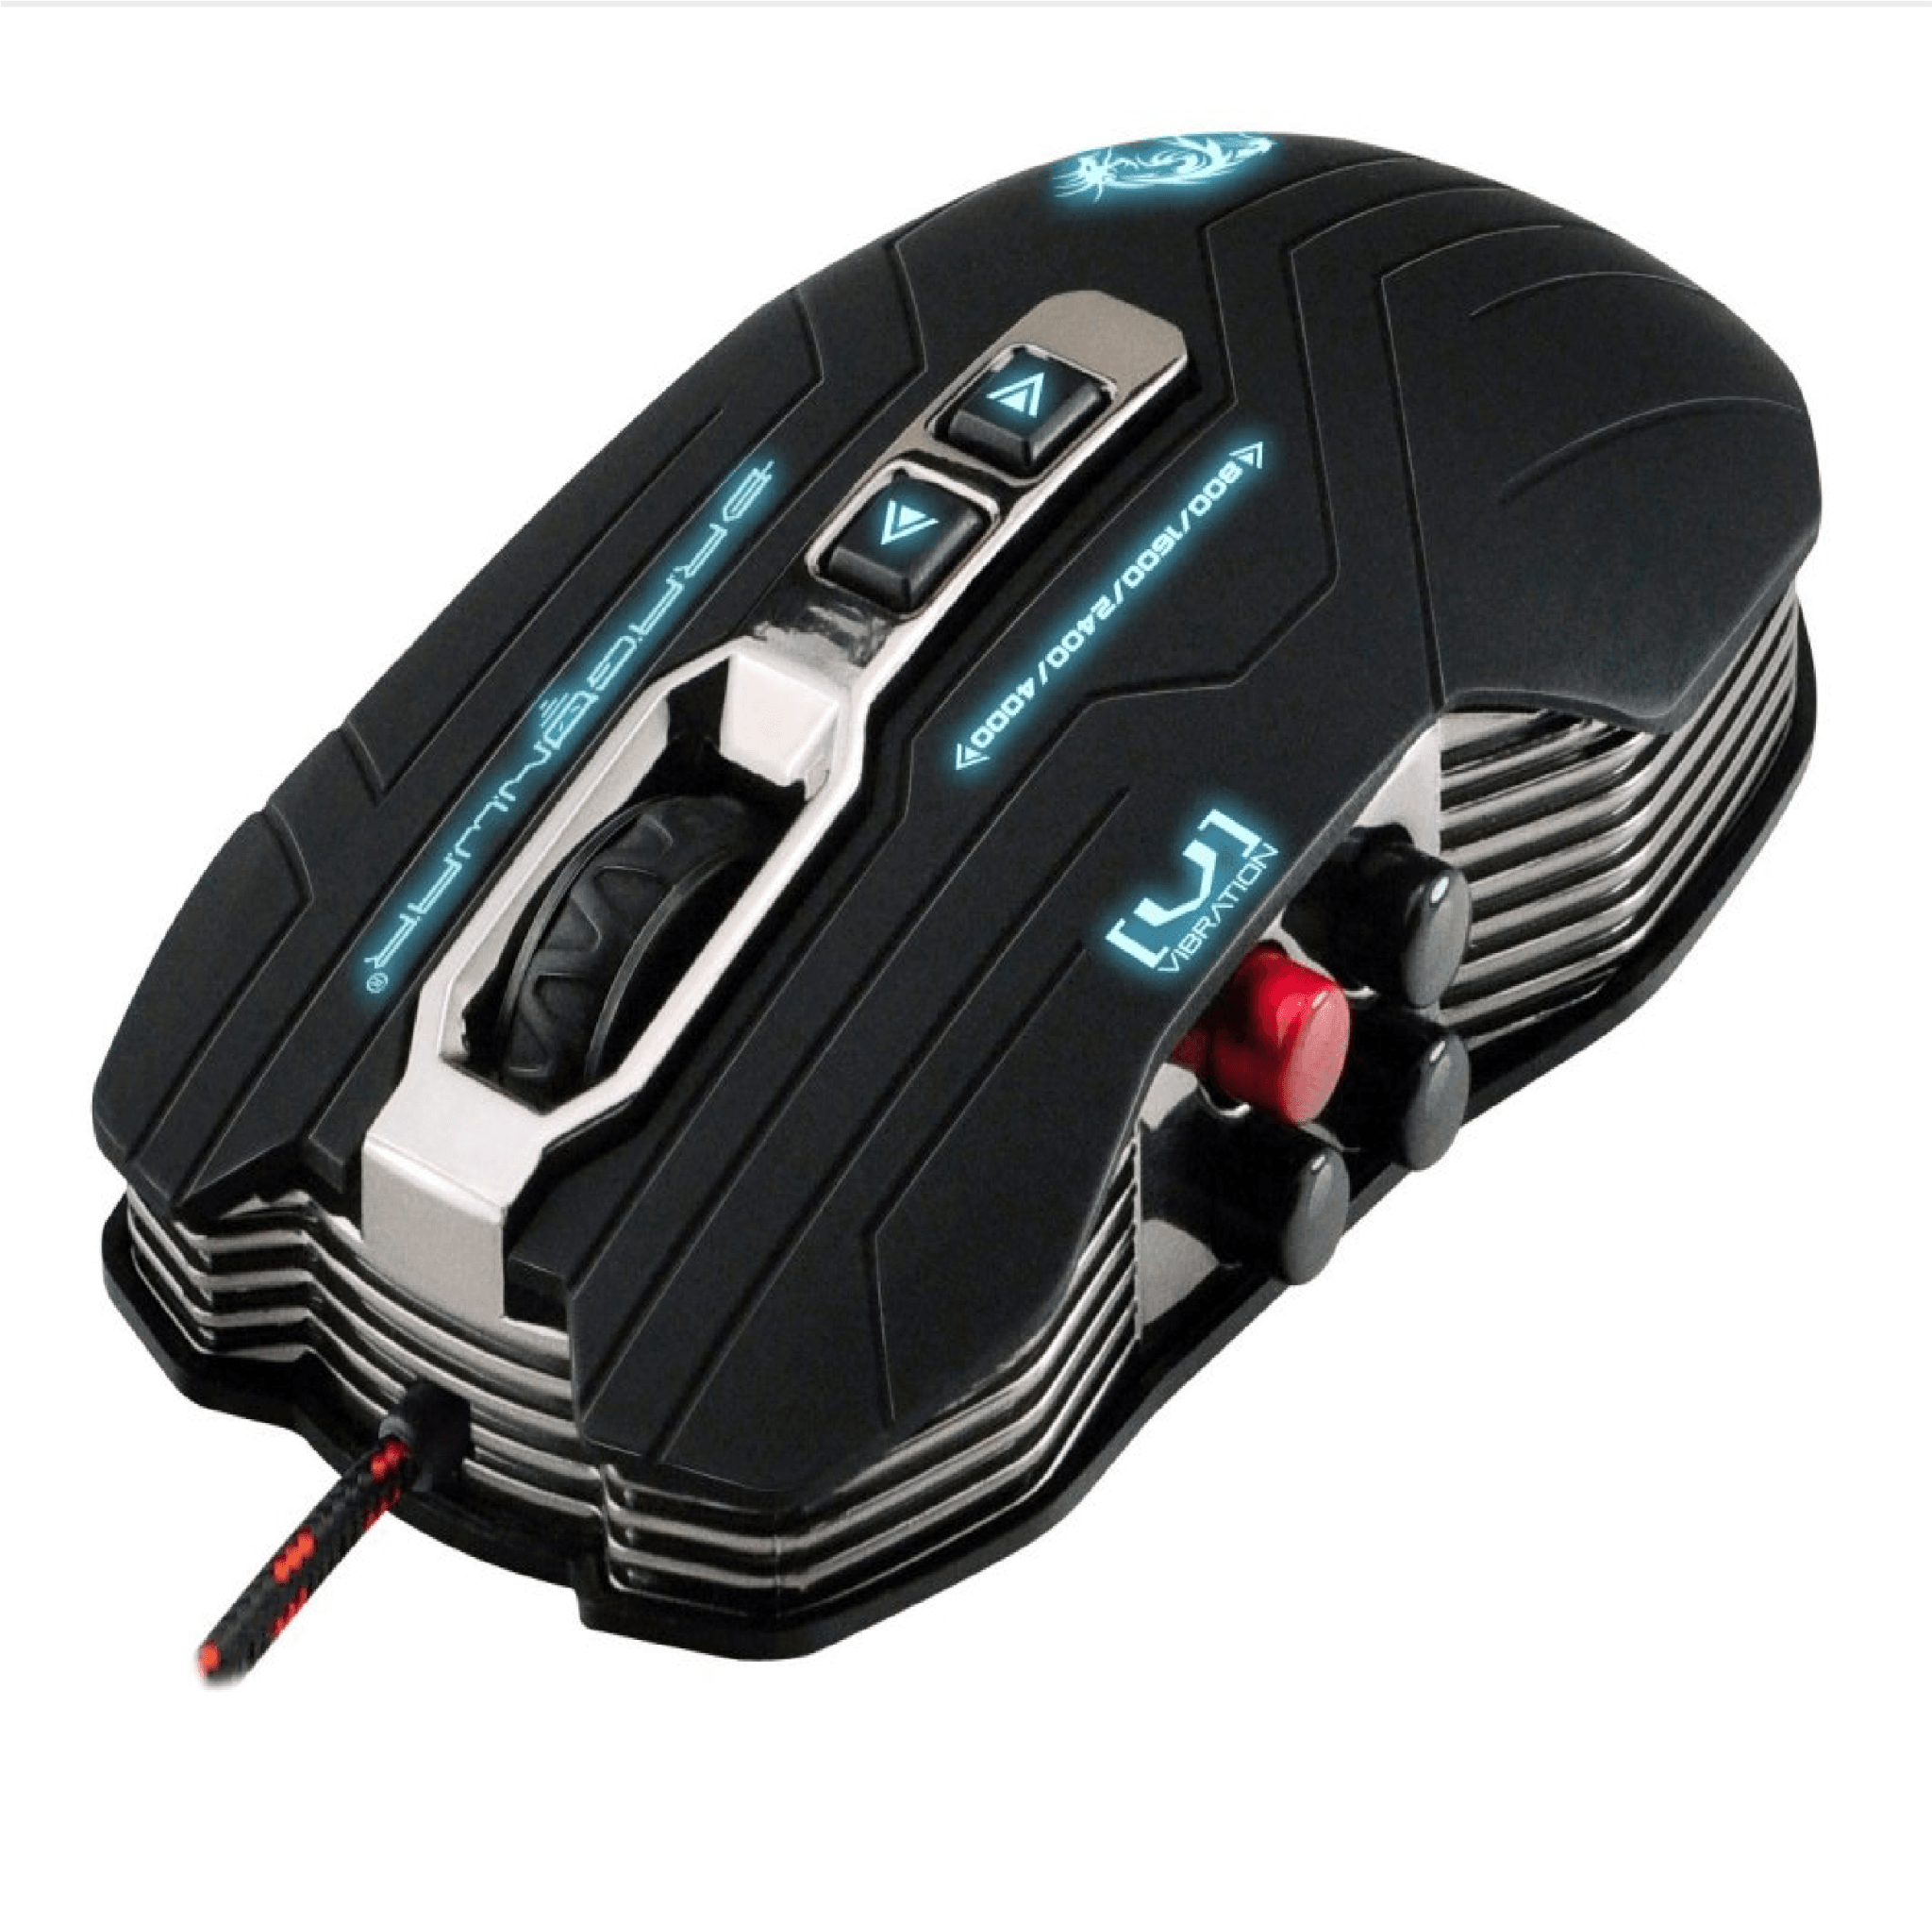 Dragon War G15 Gaia Gaming Mouse - Wired - Store 974 | ستور ٩٧٤